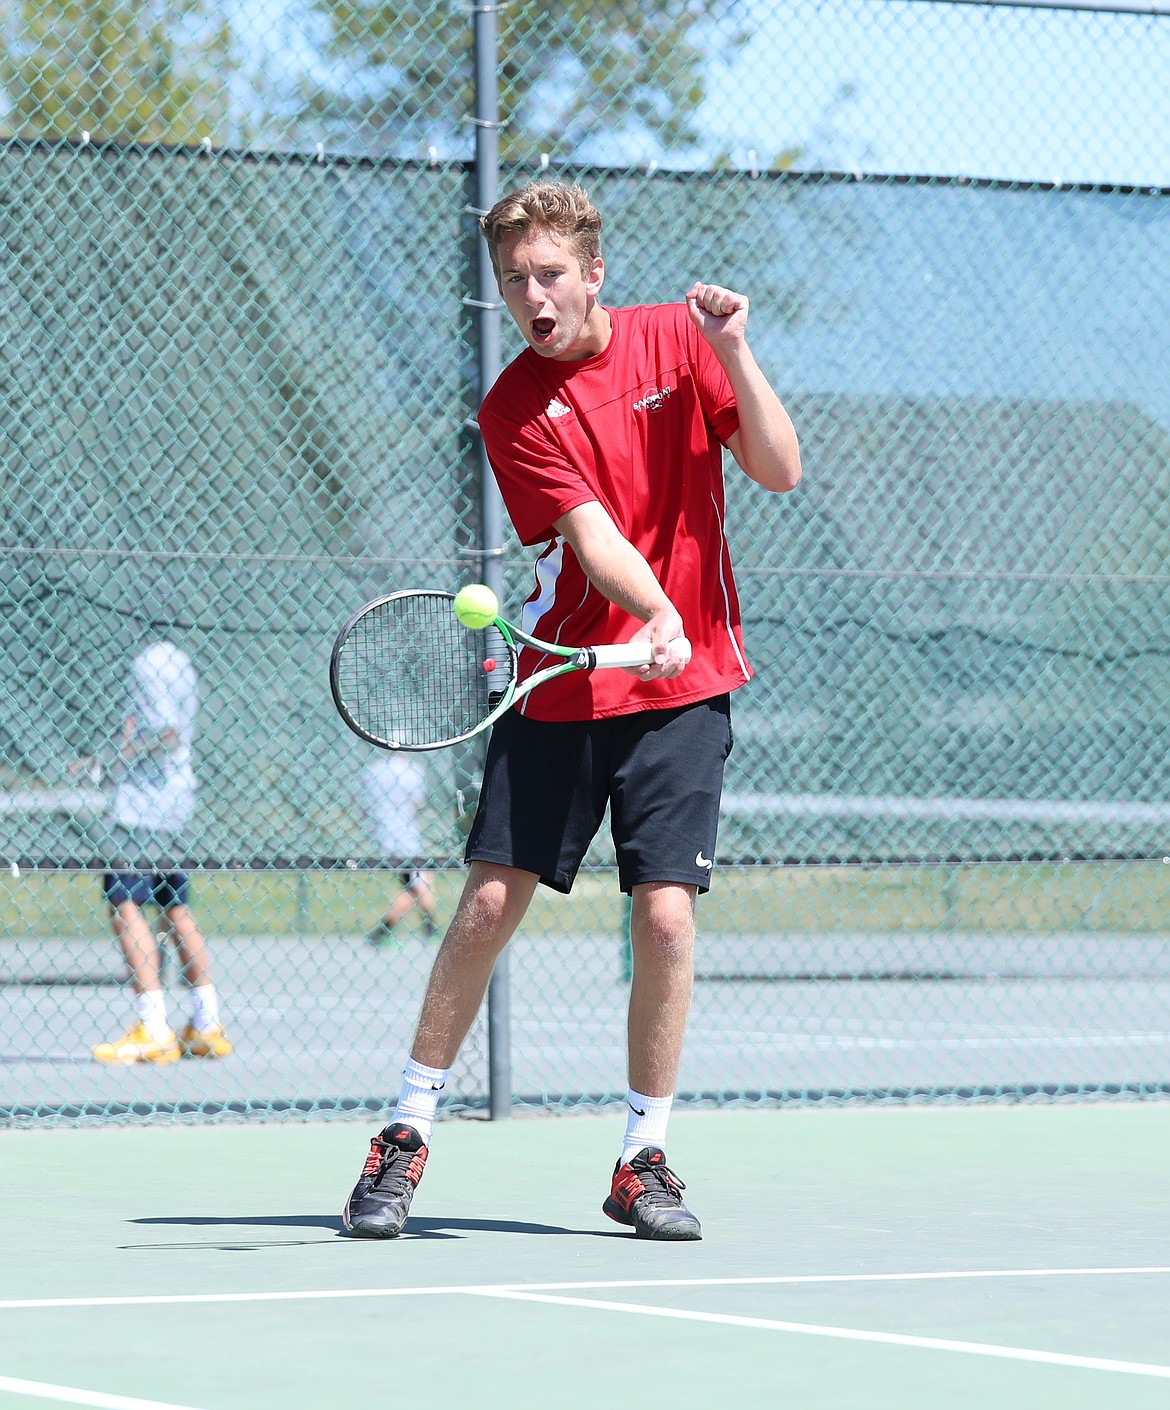 Christian Story returns a serve during the boys doubles regional championship match on Saturday at Travers Park.